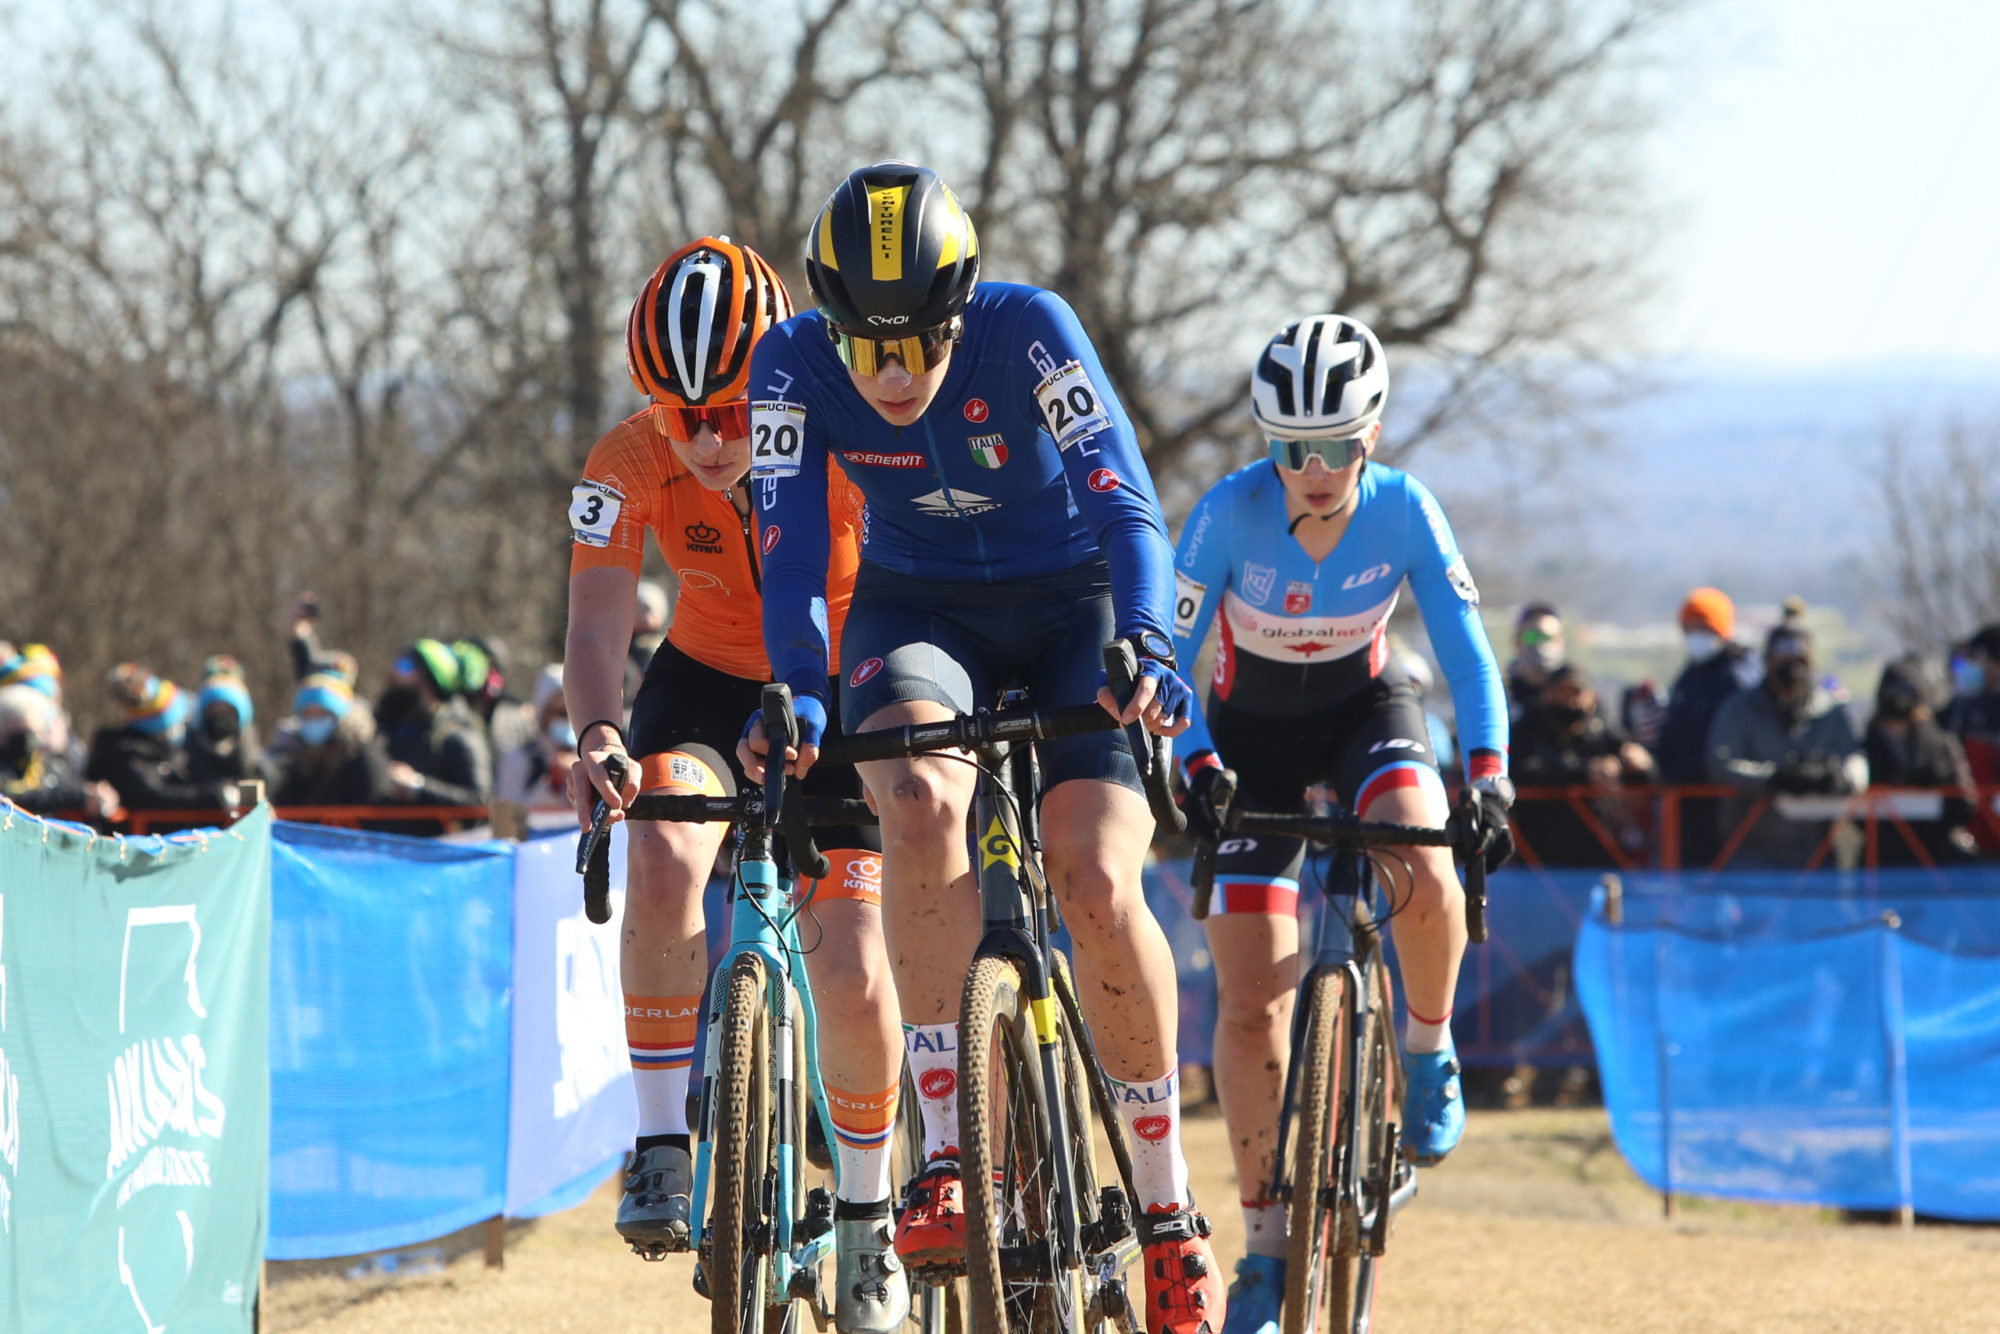 A Great Ride for the Cyclo-Cross World Championships in Fayetteville